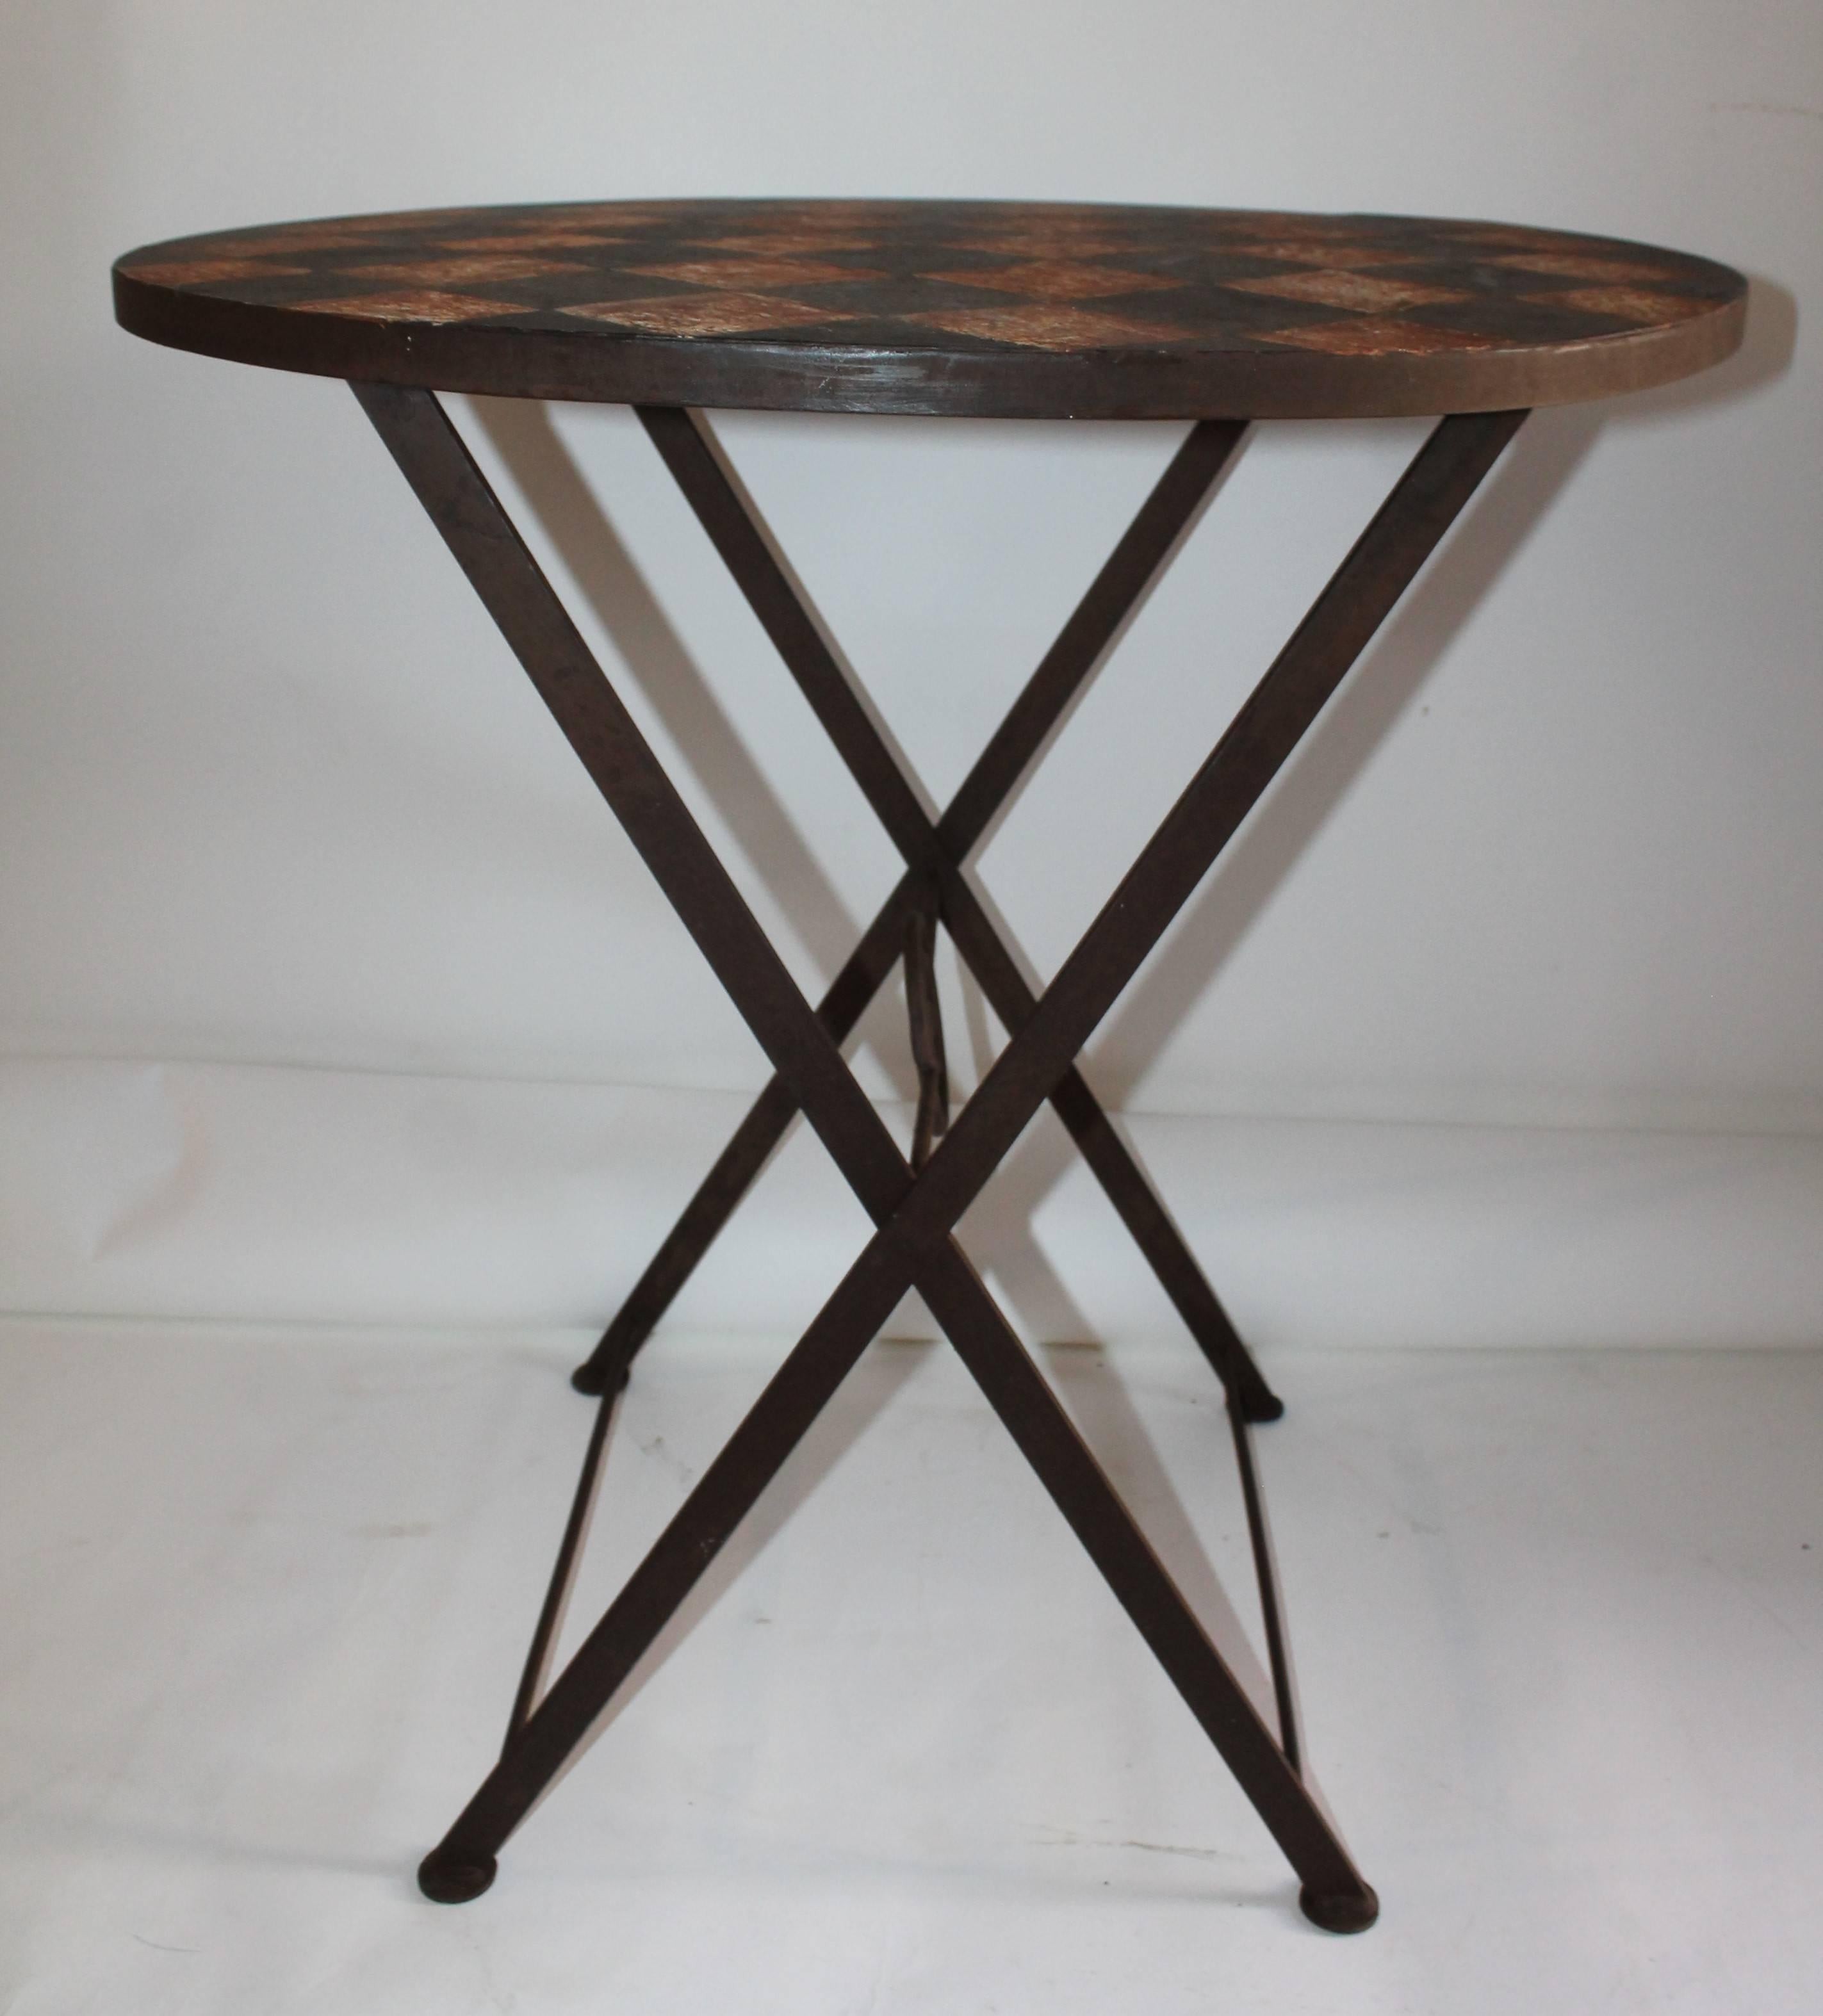 This folding painted iron garden or patio table has a checker board top and folding legs. The original painted top looks like a game board and has a wonderful patina.